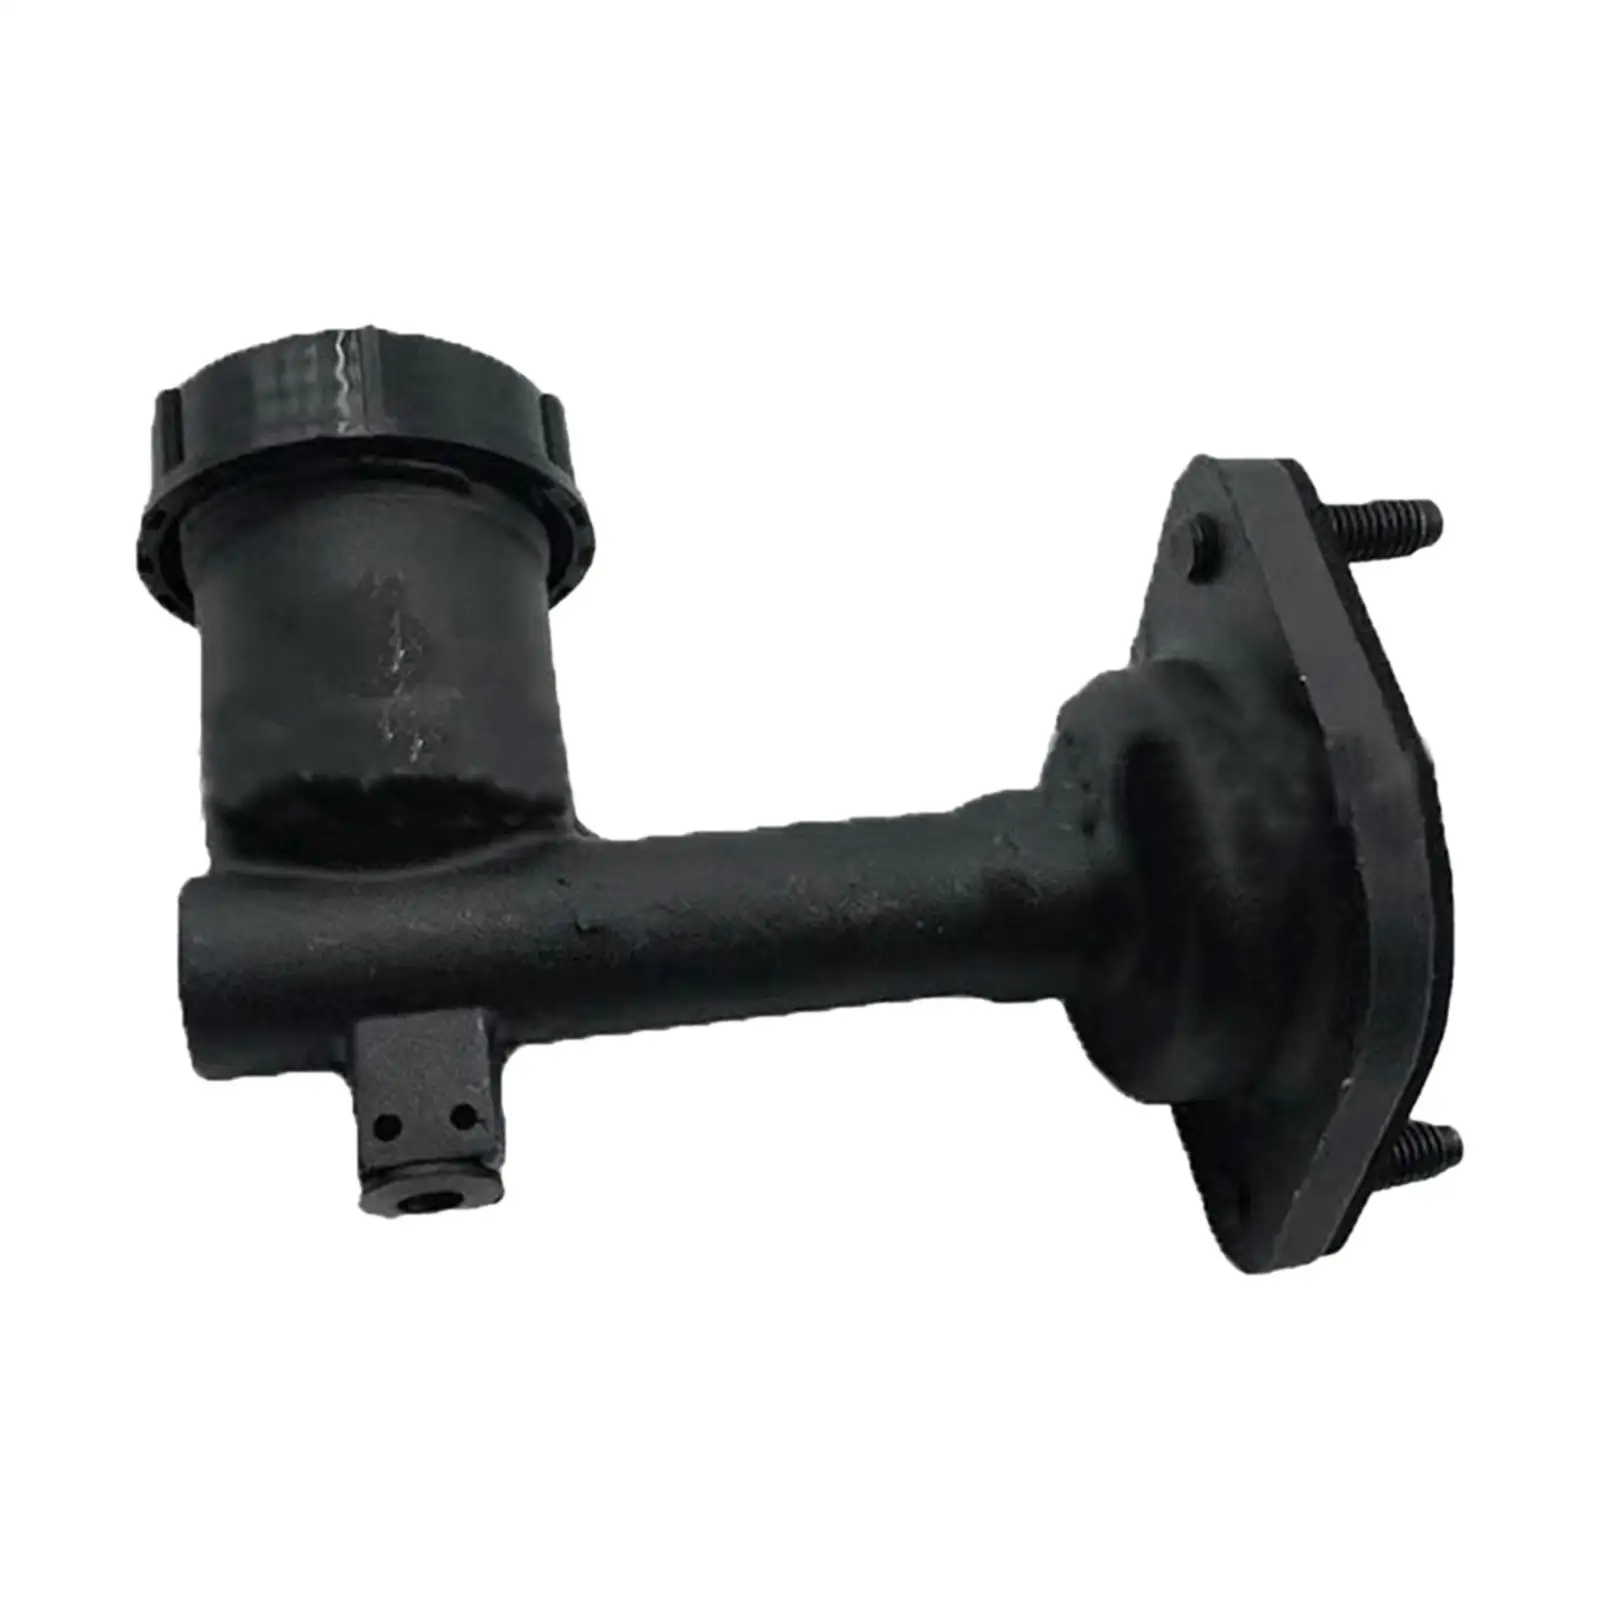 

Car Brake Clutch Master Cylinder Quality Replacement Easy to Install Clutch Master Pump 4636864 for Cherokee XJ Yj